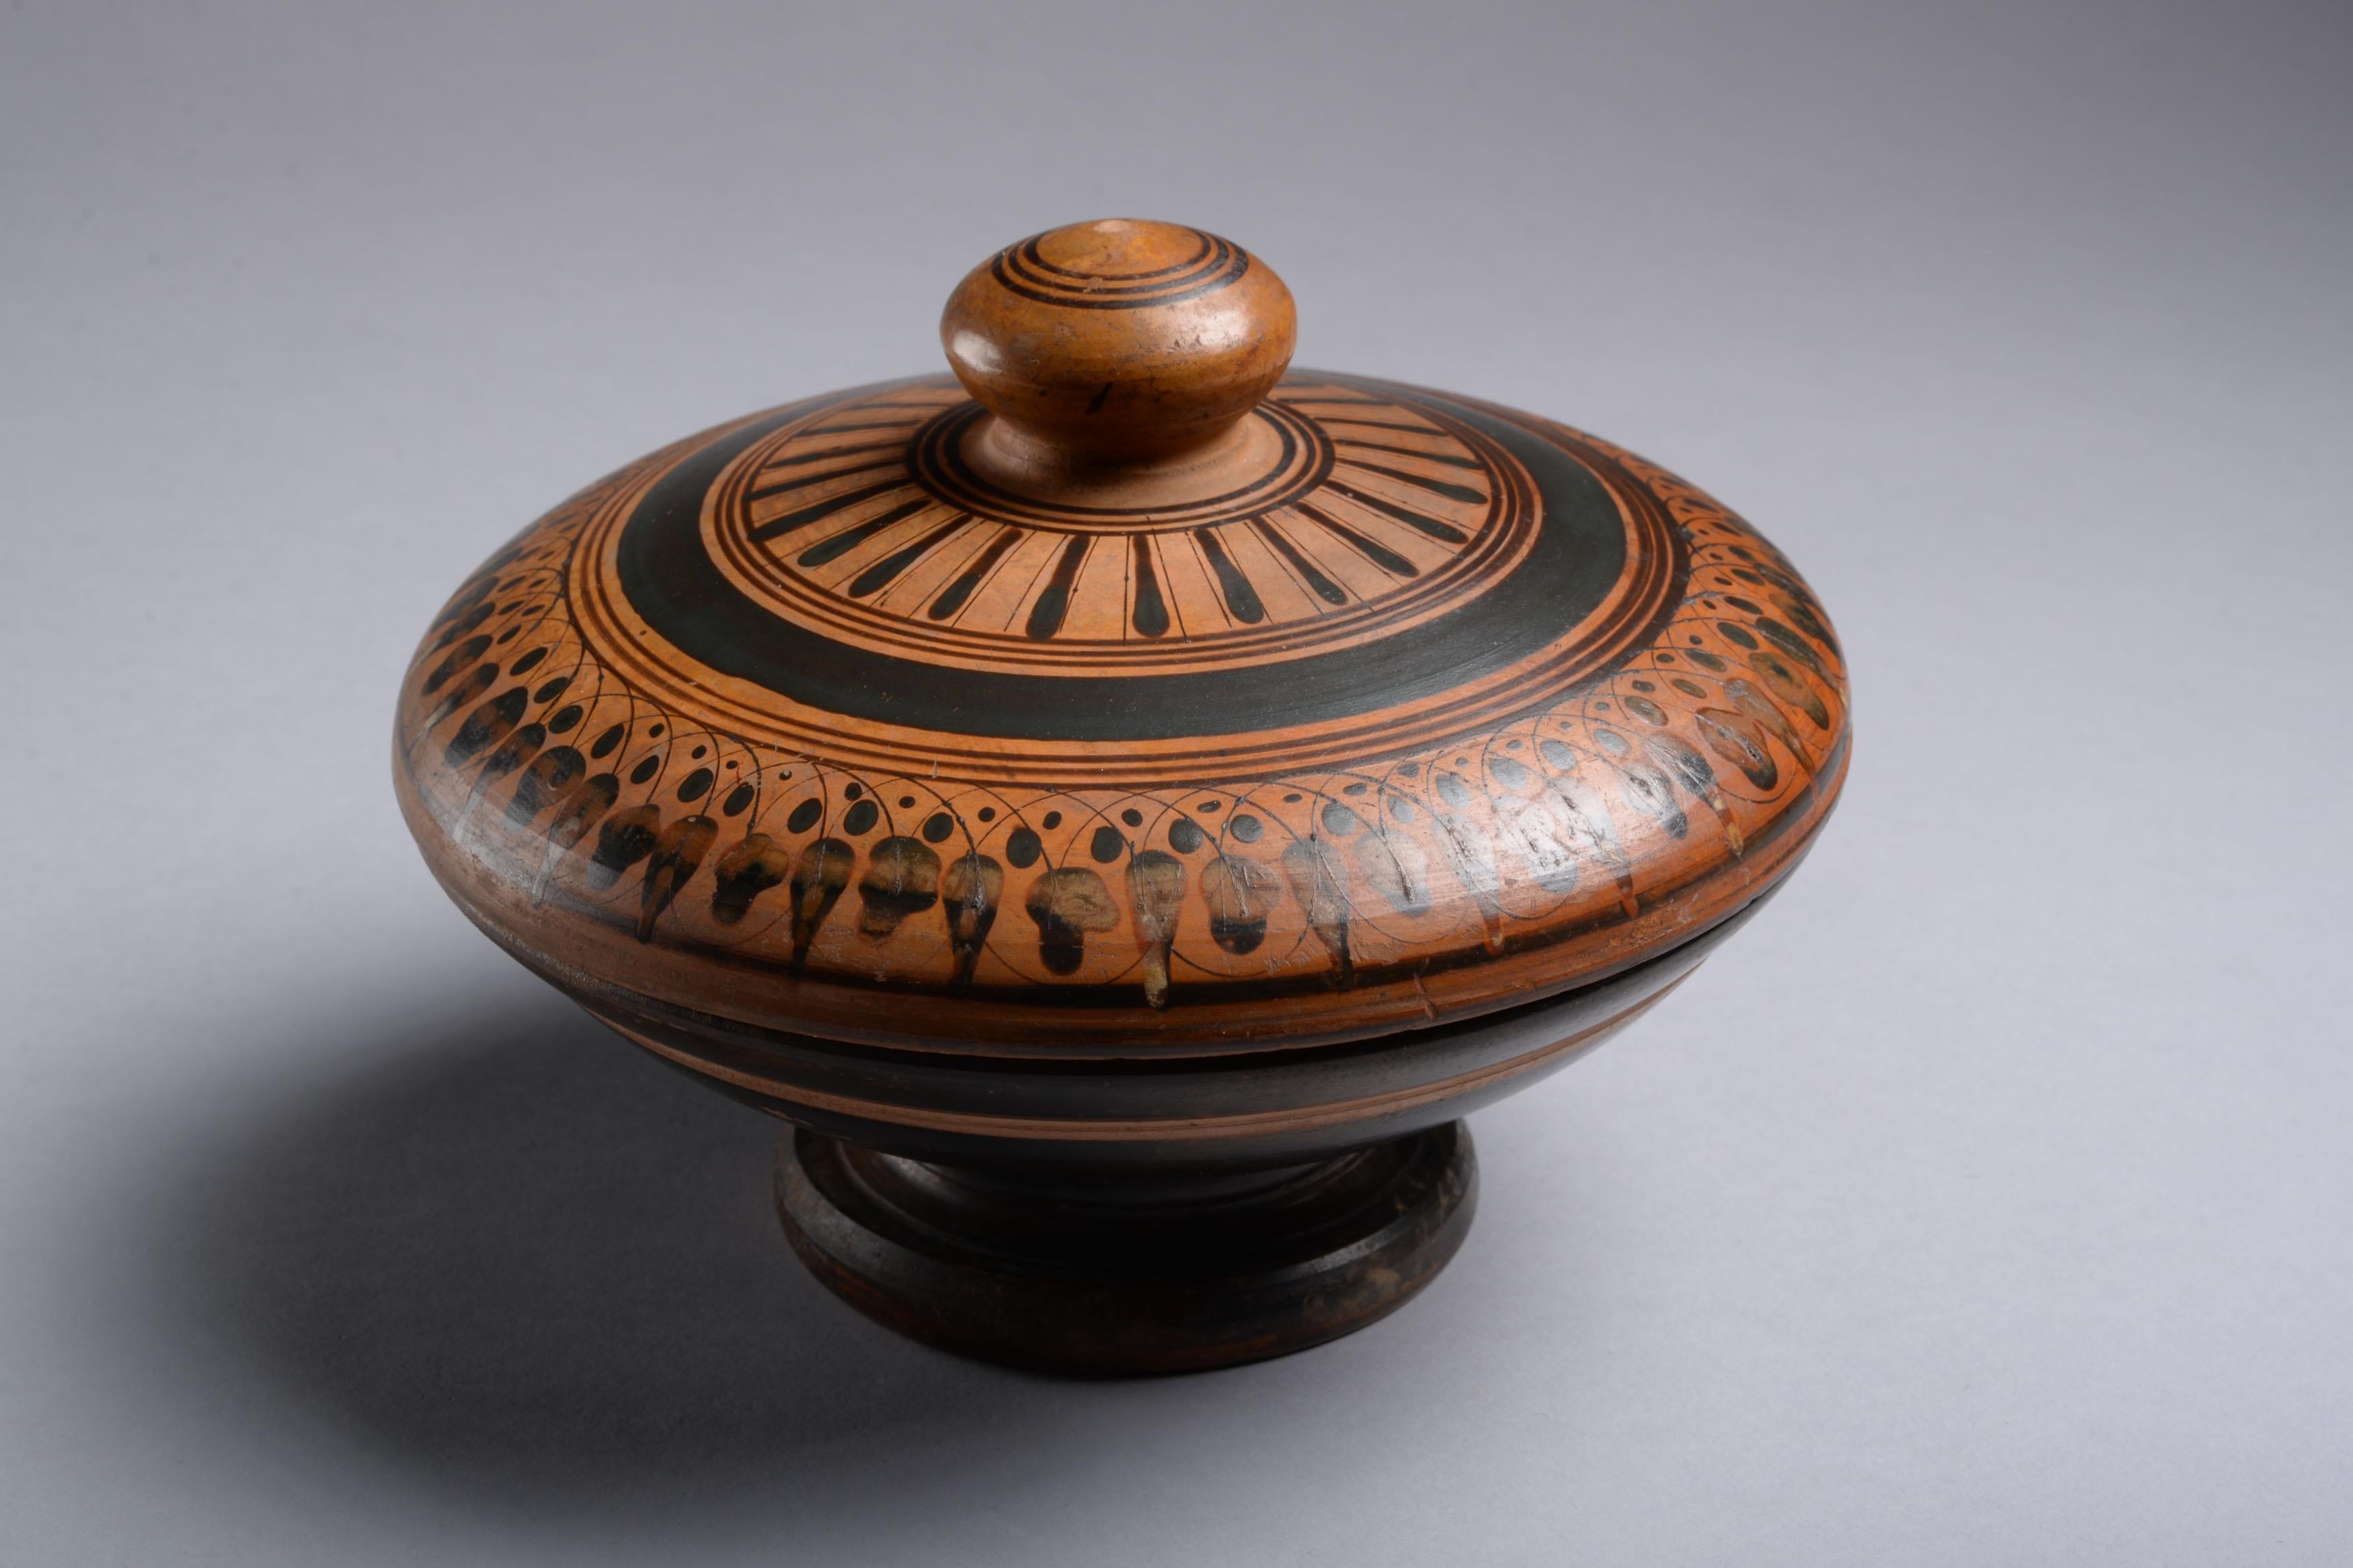 A rare Colonial Greek or Etruscan Attic black-figure Pyxis
Circa 6th century B.C. 
Terracotta

Finely moulded, the cover with rounded knob and reserved decoration of concentric circles, the body of the lid with further black glazed concentric bands